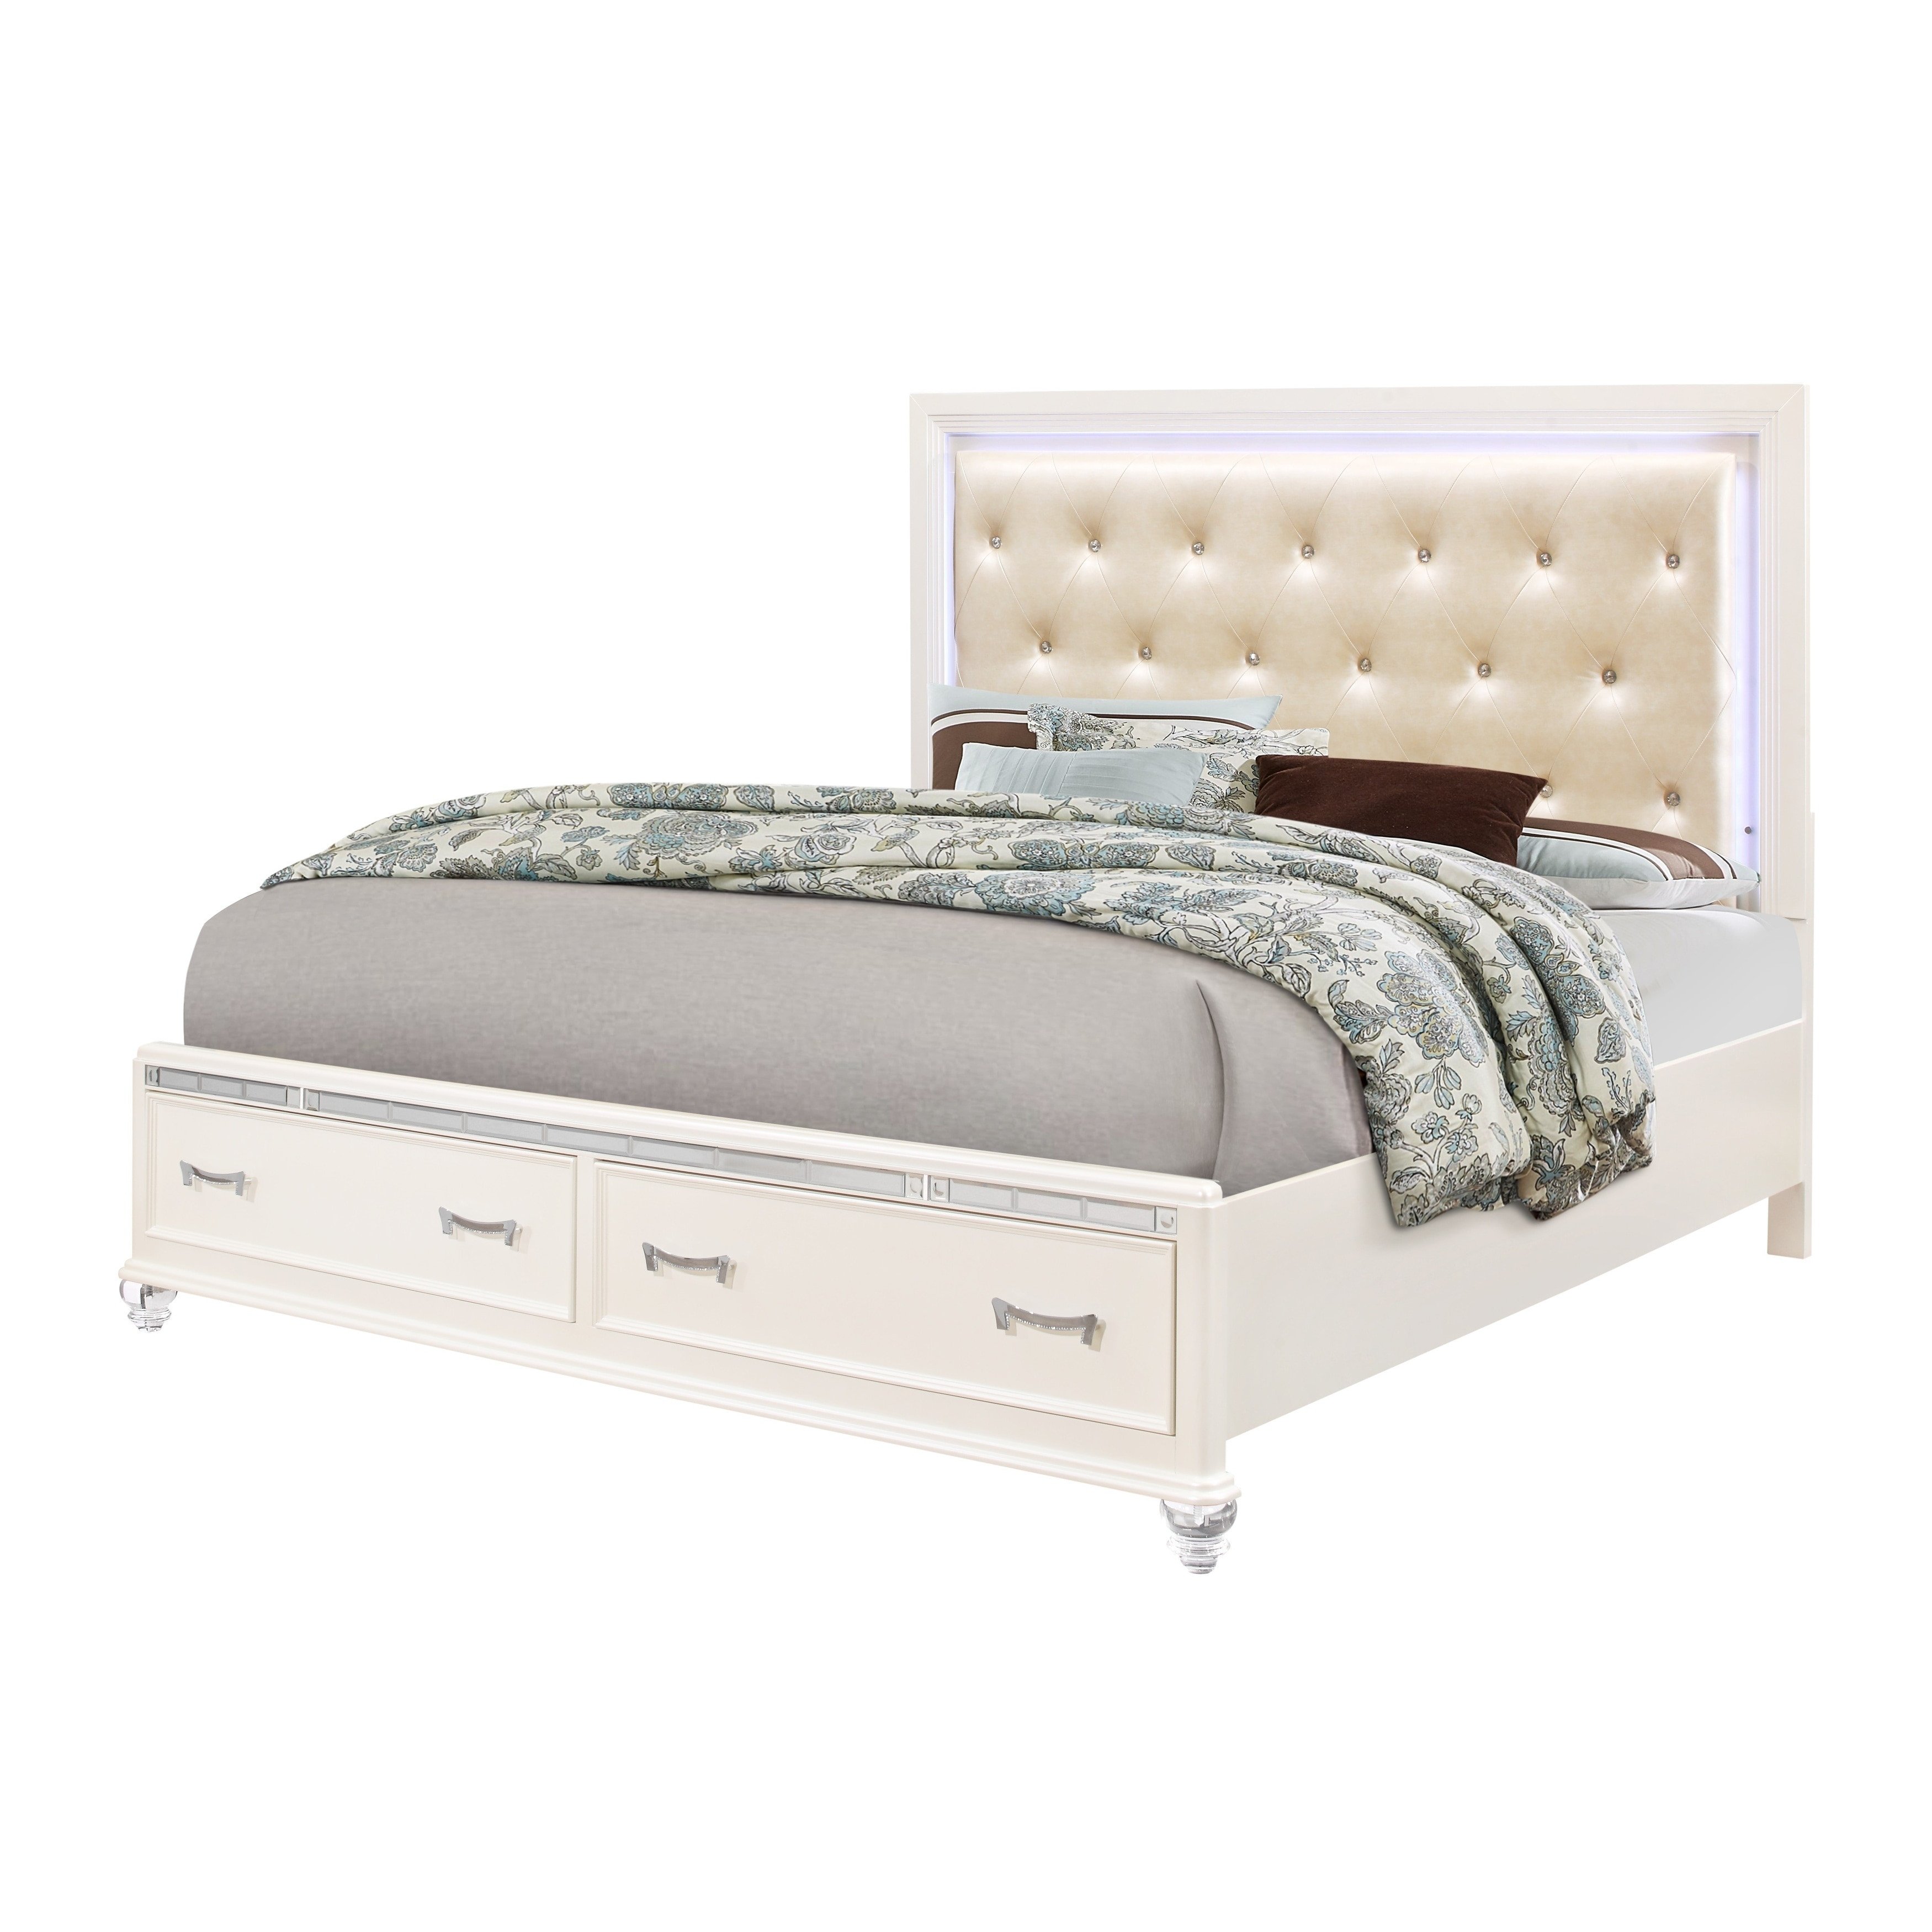 White Contemporary Bedroom Furniture Inspirational Global Furniture Usa sofia White Queen Bed